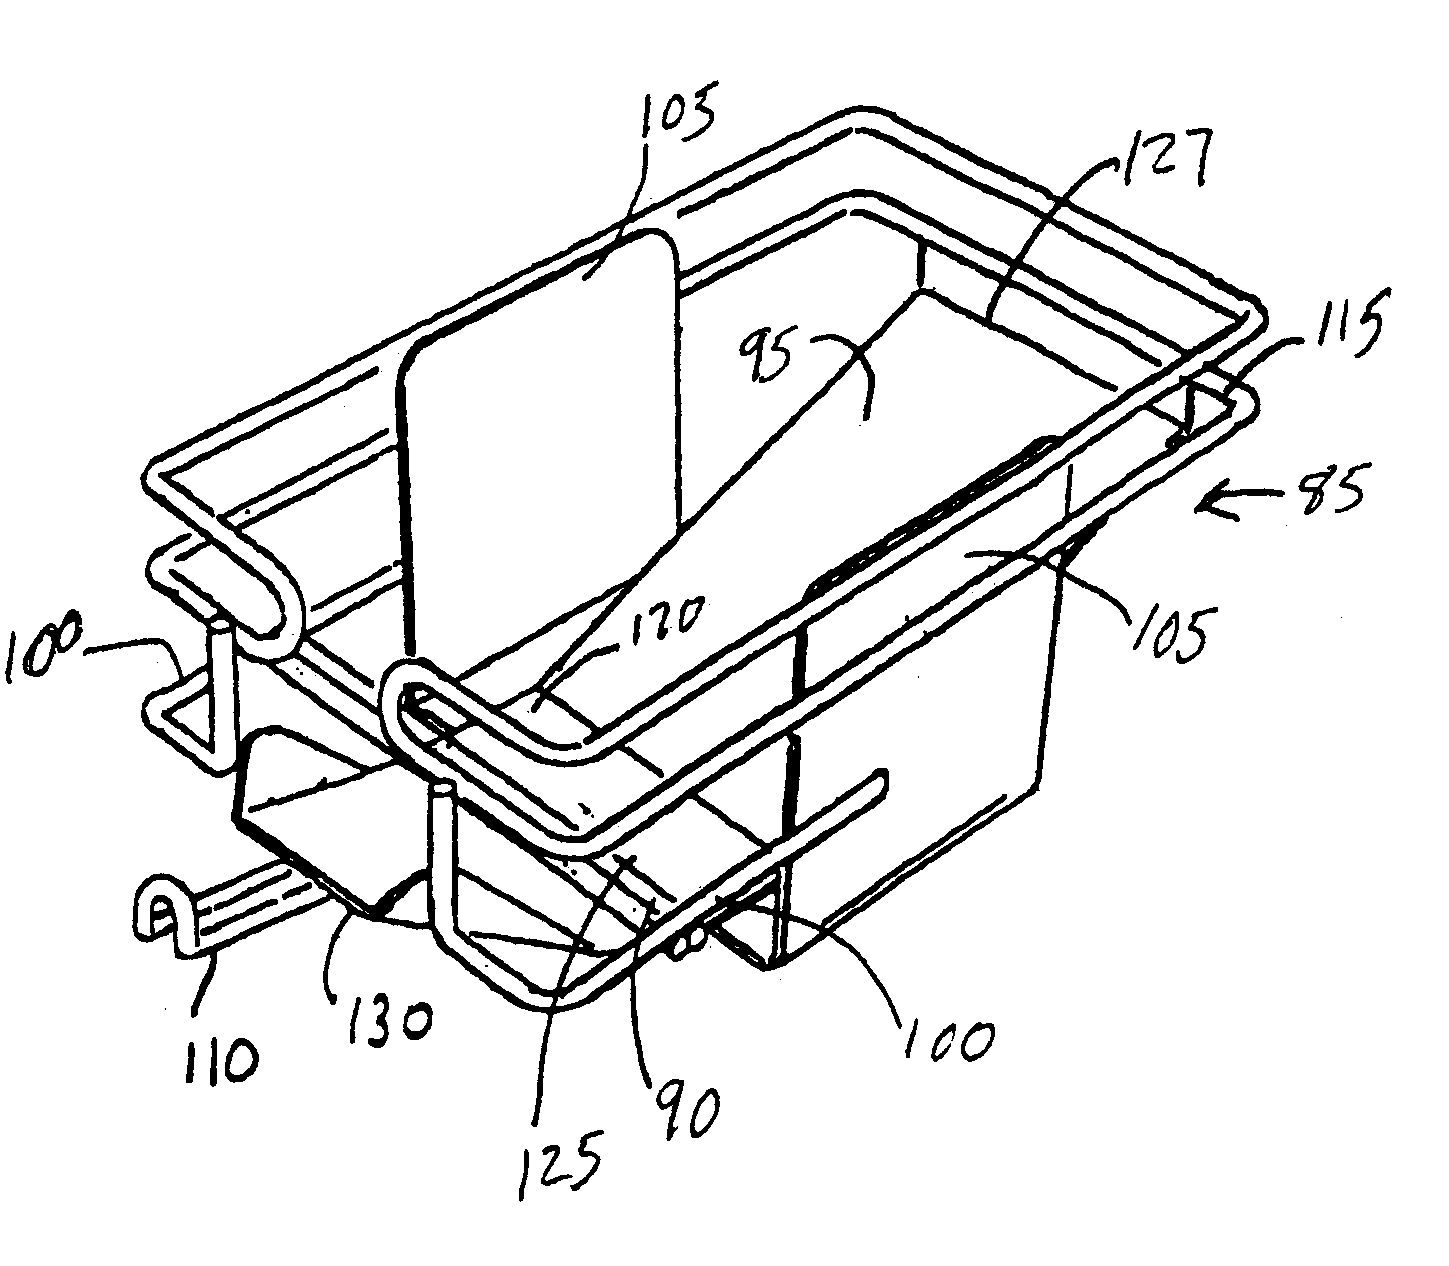 Roll mounted bags and dispensers for same